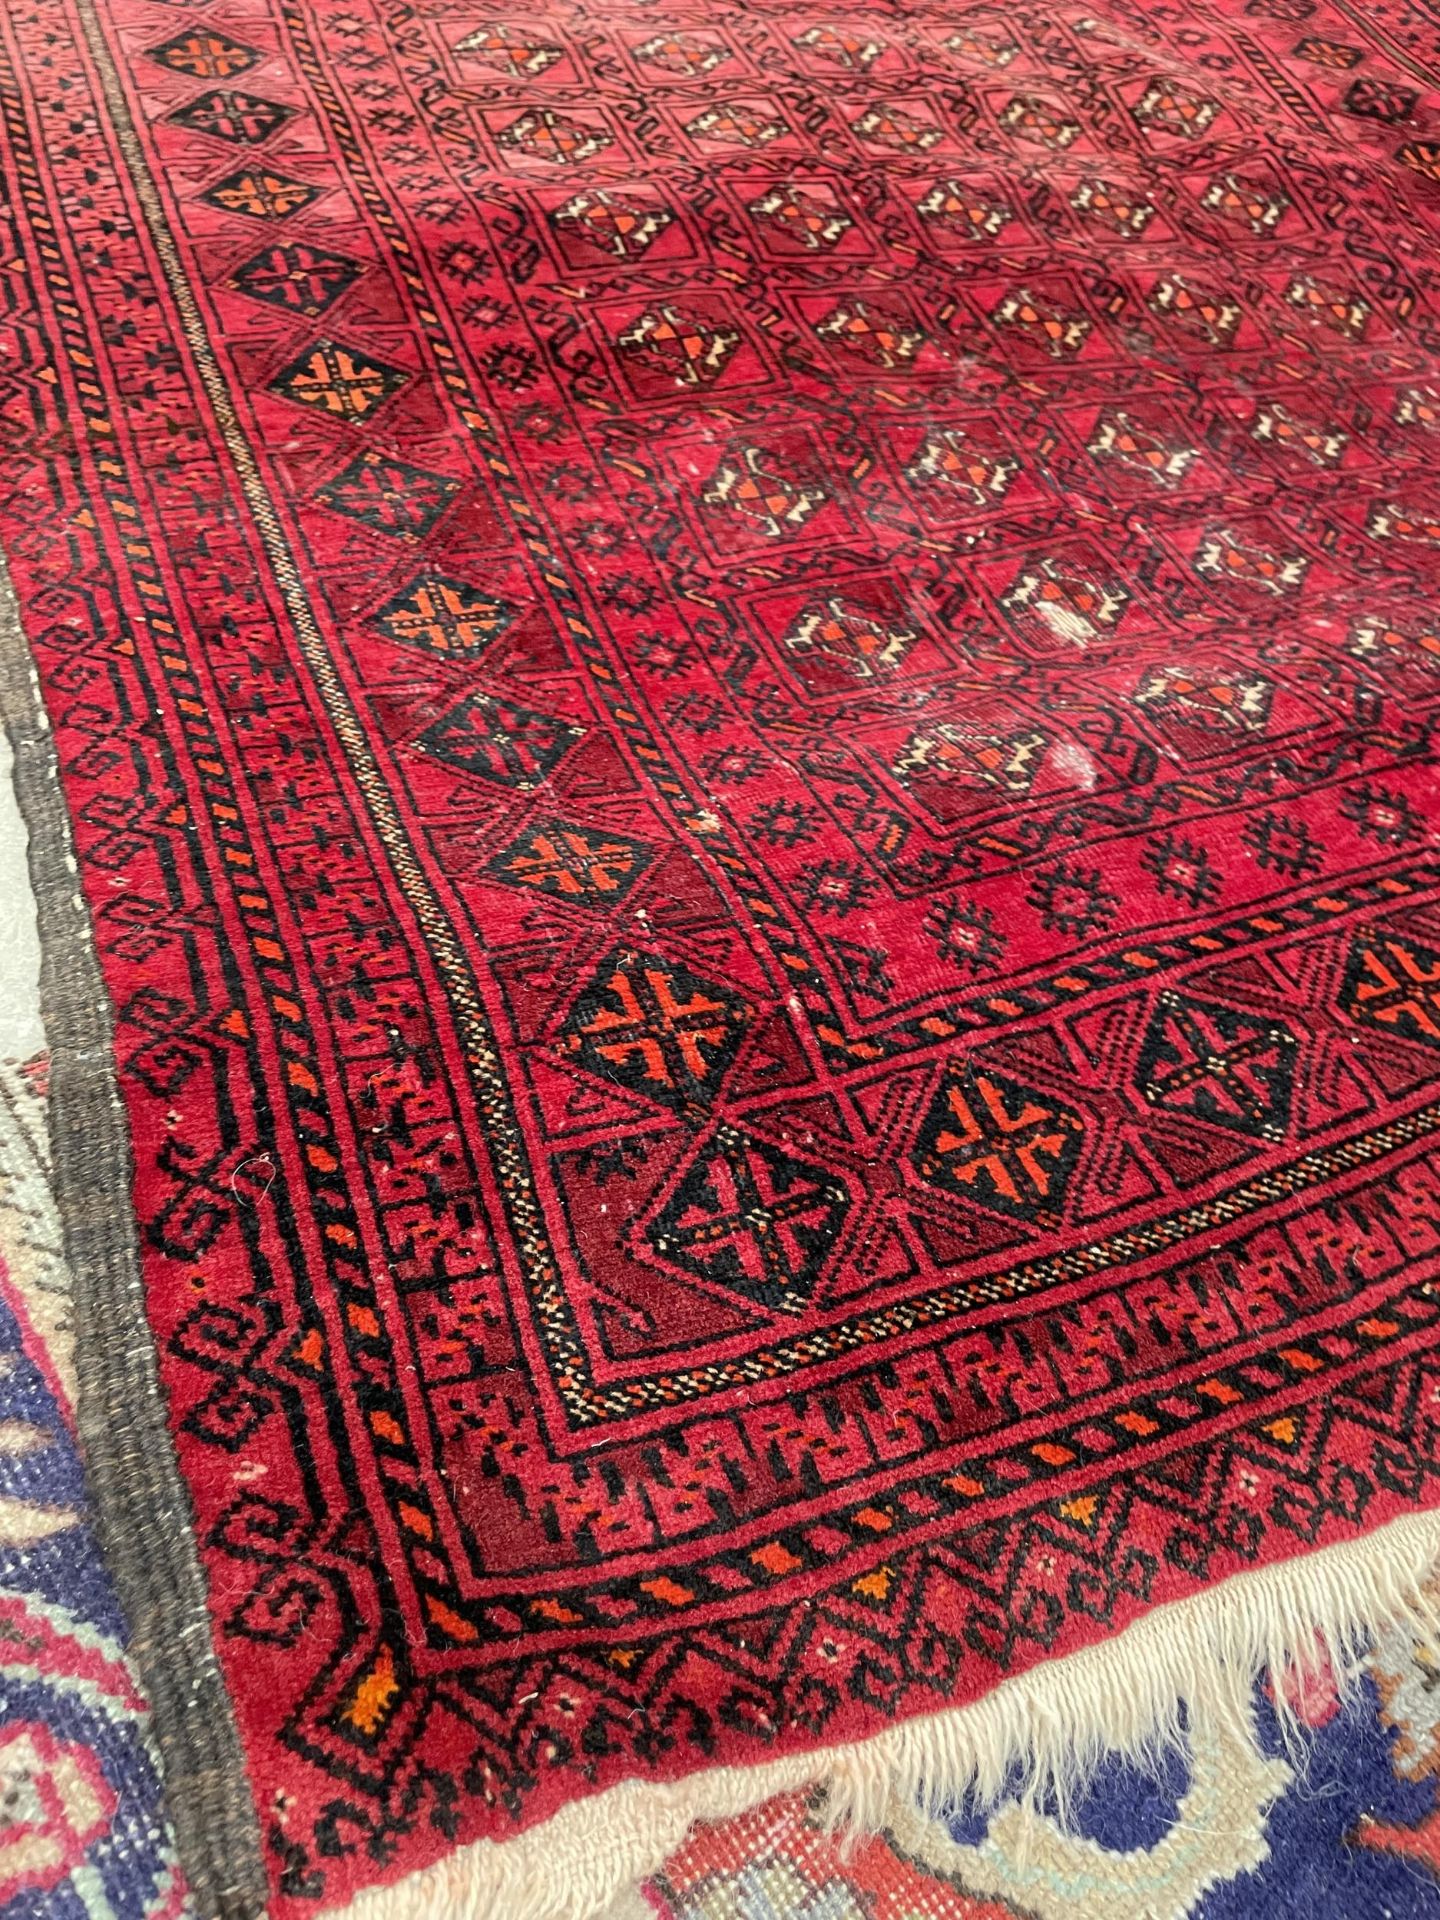 A SMALL RED PATTERNED FRINGED RUG - Image 2 of 3